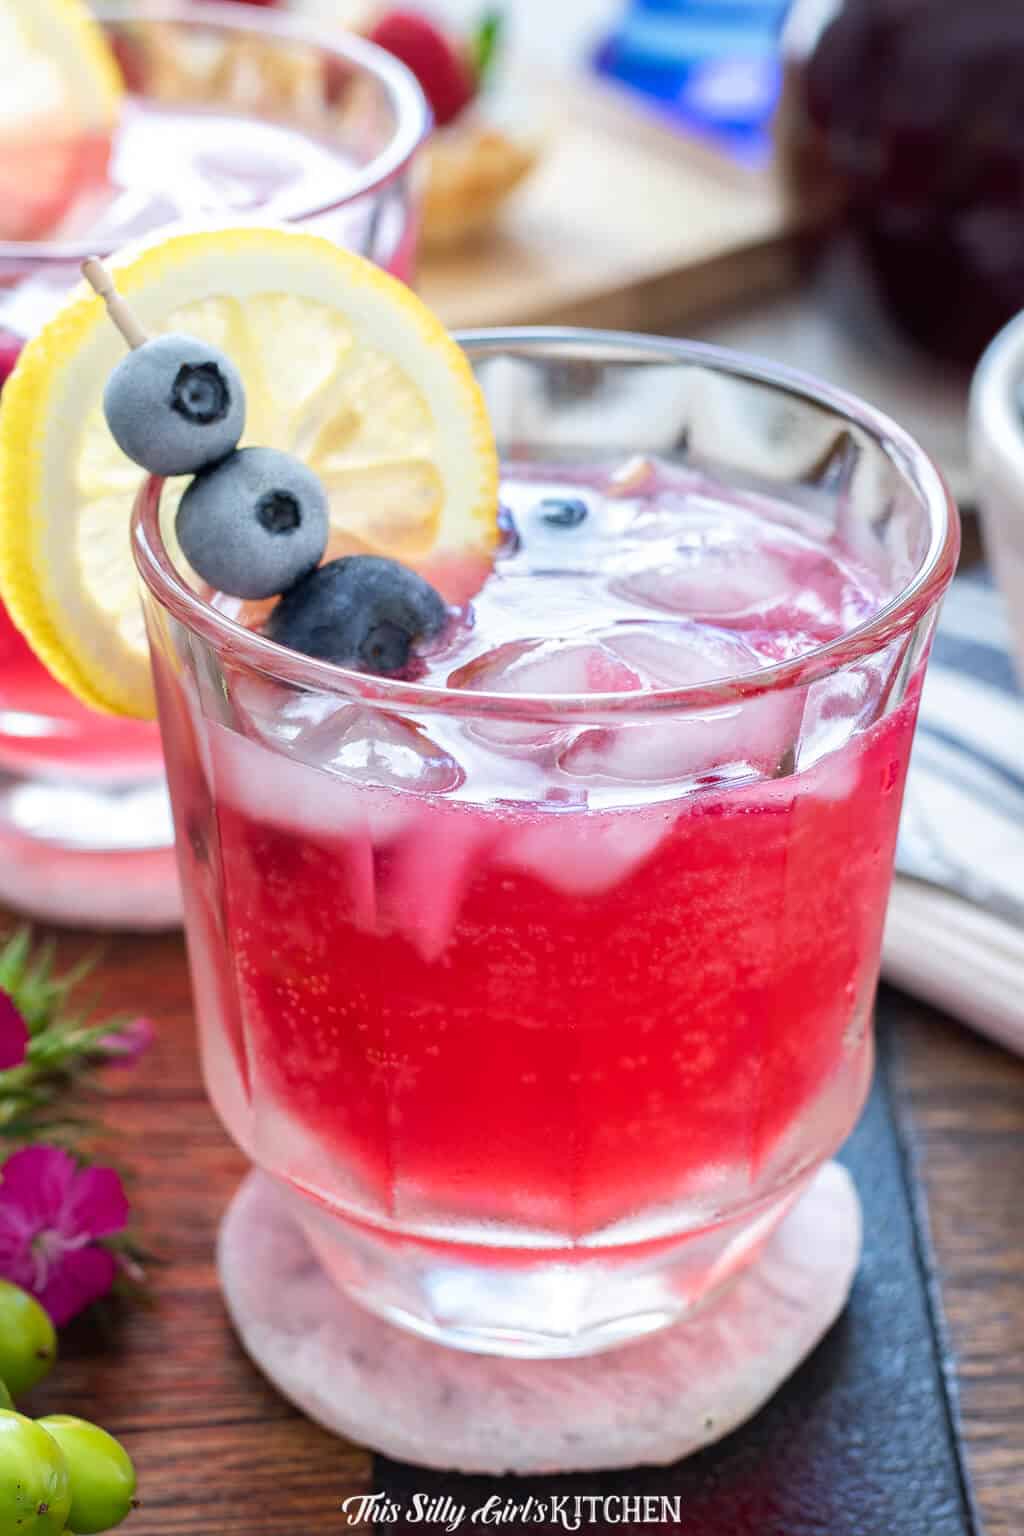 Blueberry Lemonade Cocktail, a light and refreshing vodka cocktail, a beautiful signature drink for parties! #recipe from thissillygirlskitchen.com #blueberry #lemonade #blueberrylemonade #cocktail #vodka #vodkacoctail #party #blueberrylemonadecocktail